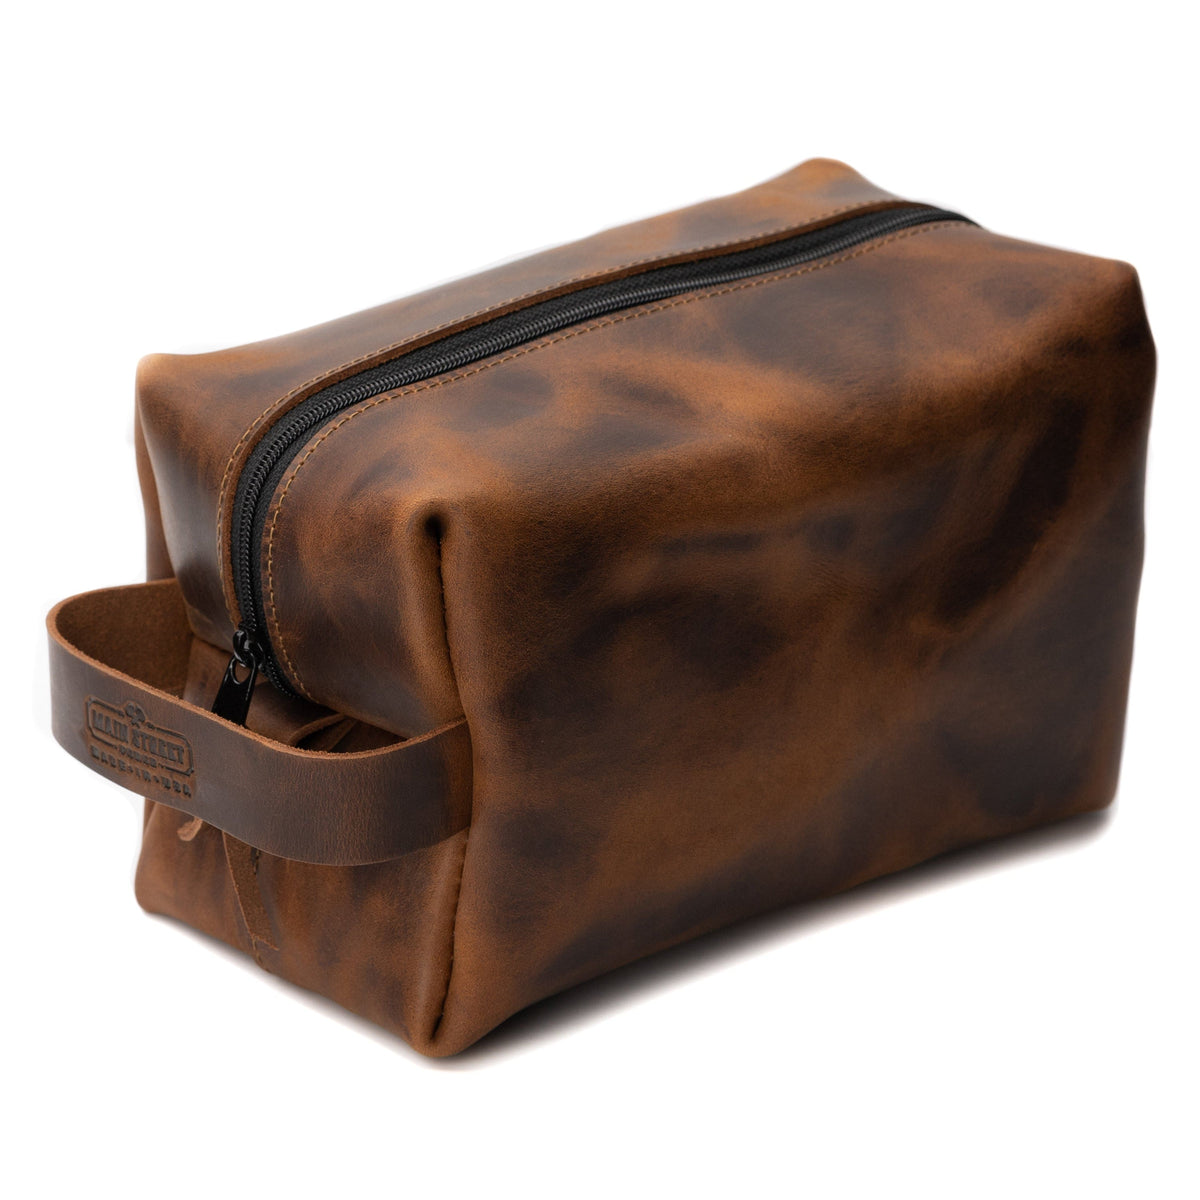 Main Street Forge Bootlegger Brown Premium Full Grain Leather Toiletry Bag for Men | Made in USA | Travel Pack for Shaving Essentials &amp; Accessories | Compact, Lightweight Mens Bathroom &amp; Shower Case